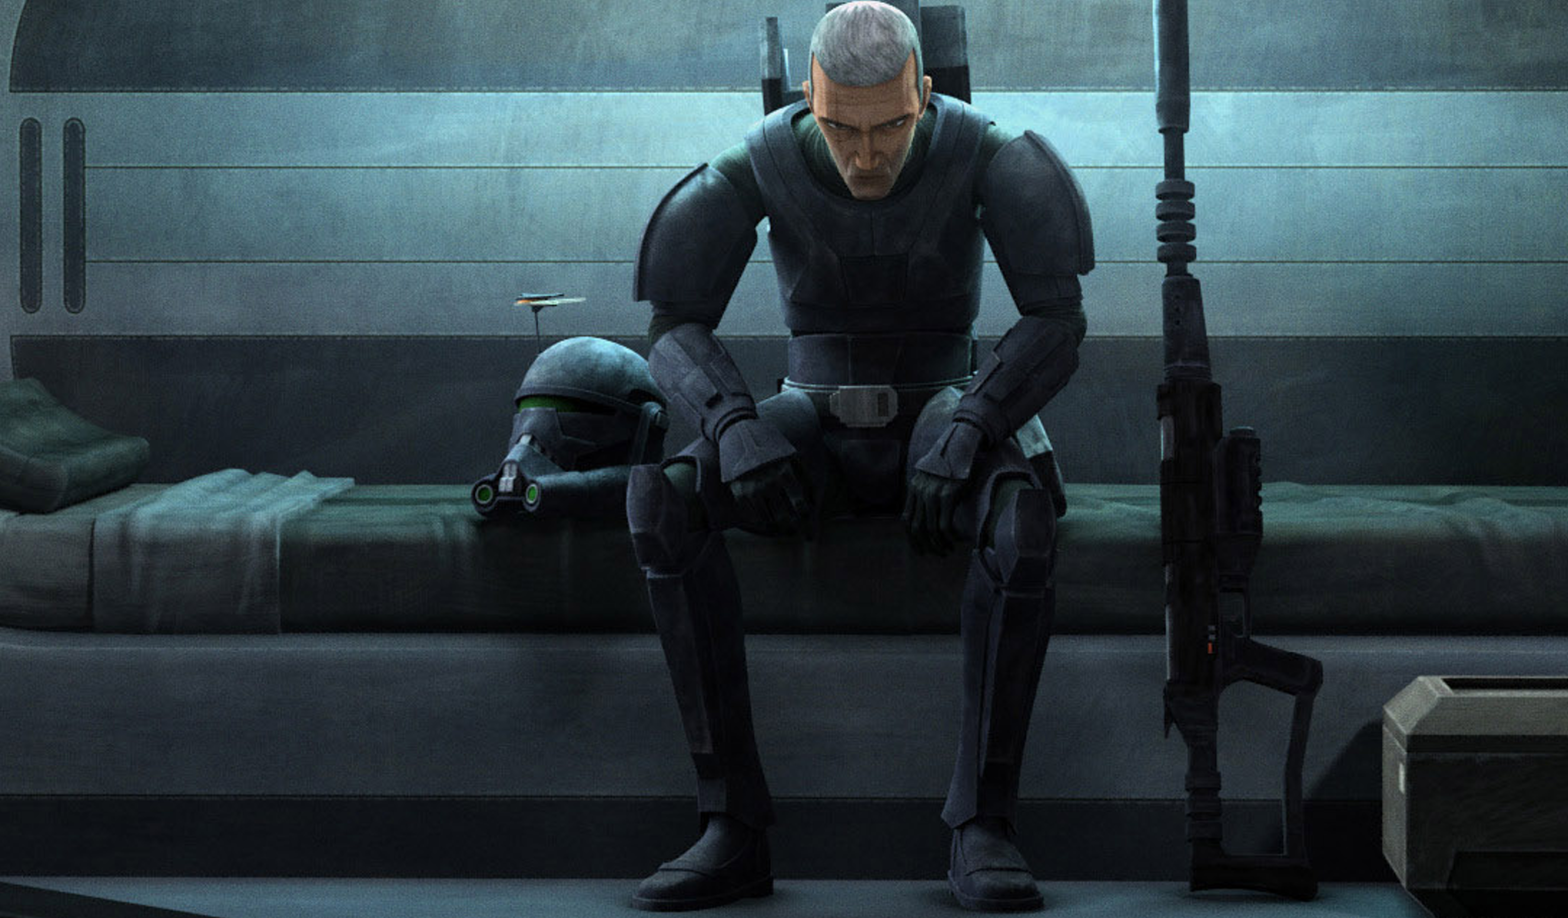 Crosshair finds himself in a dark new position. (Image: Lucasfilm)